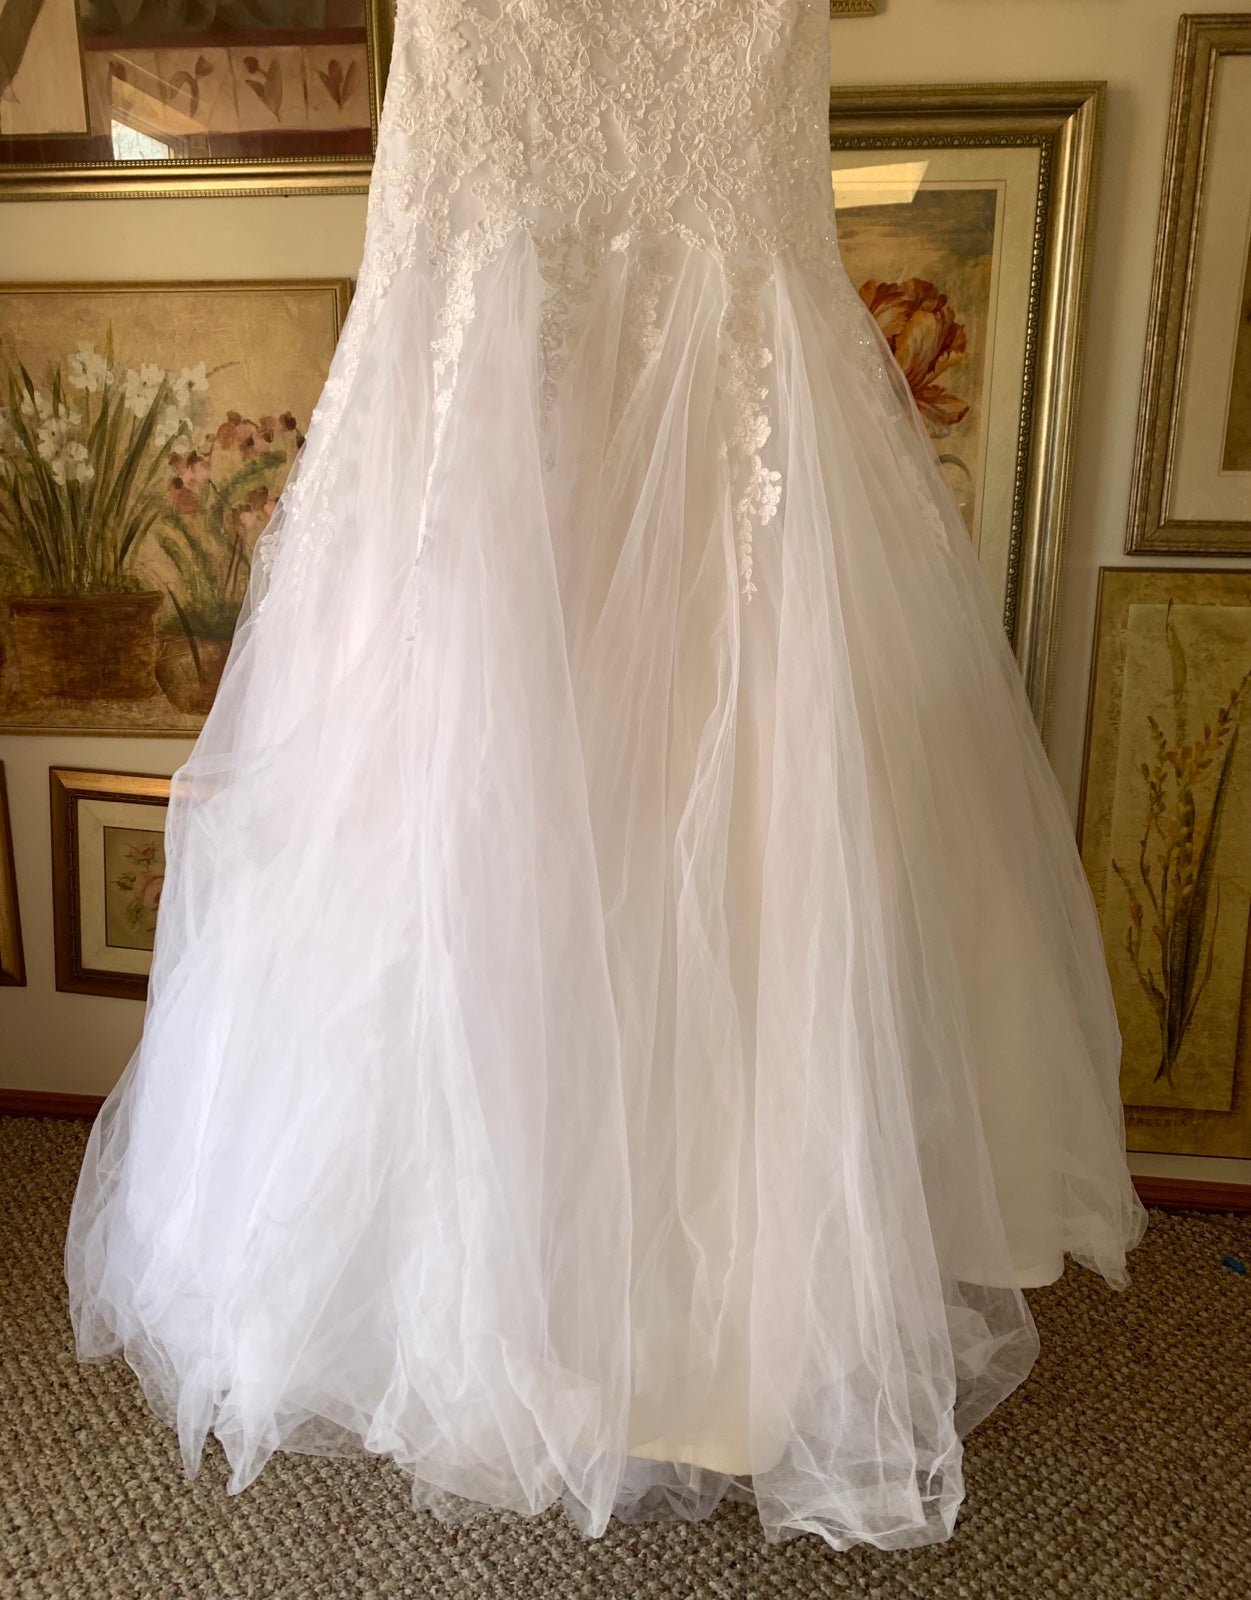 the Lowest price white lace strapless ball gown wedding dress pc4FBjzHg Factory Price